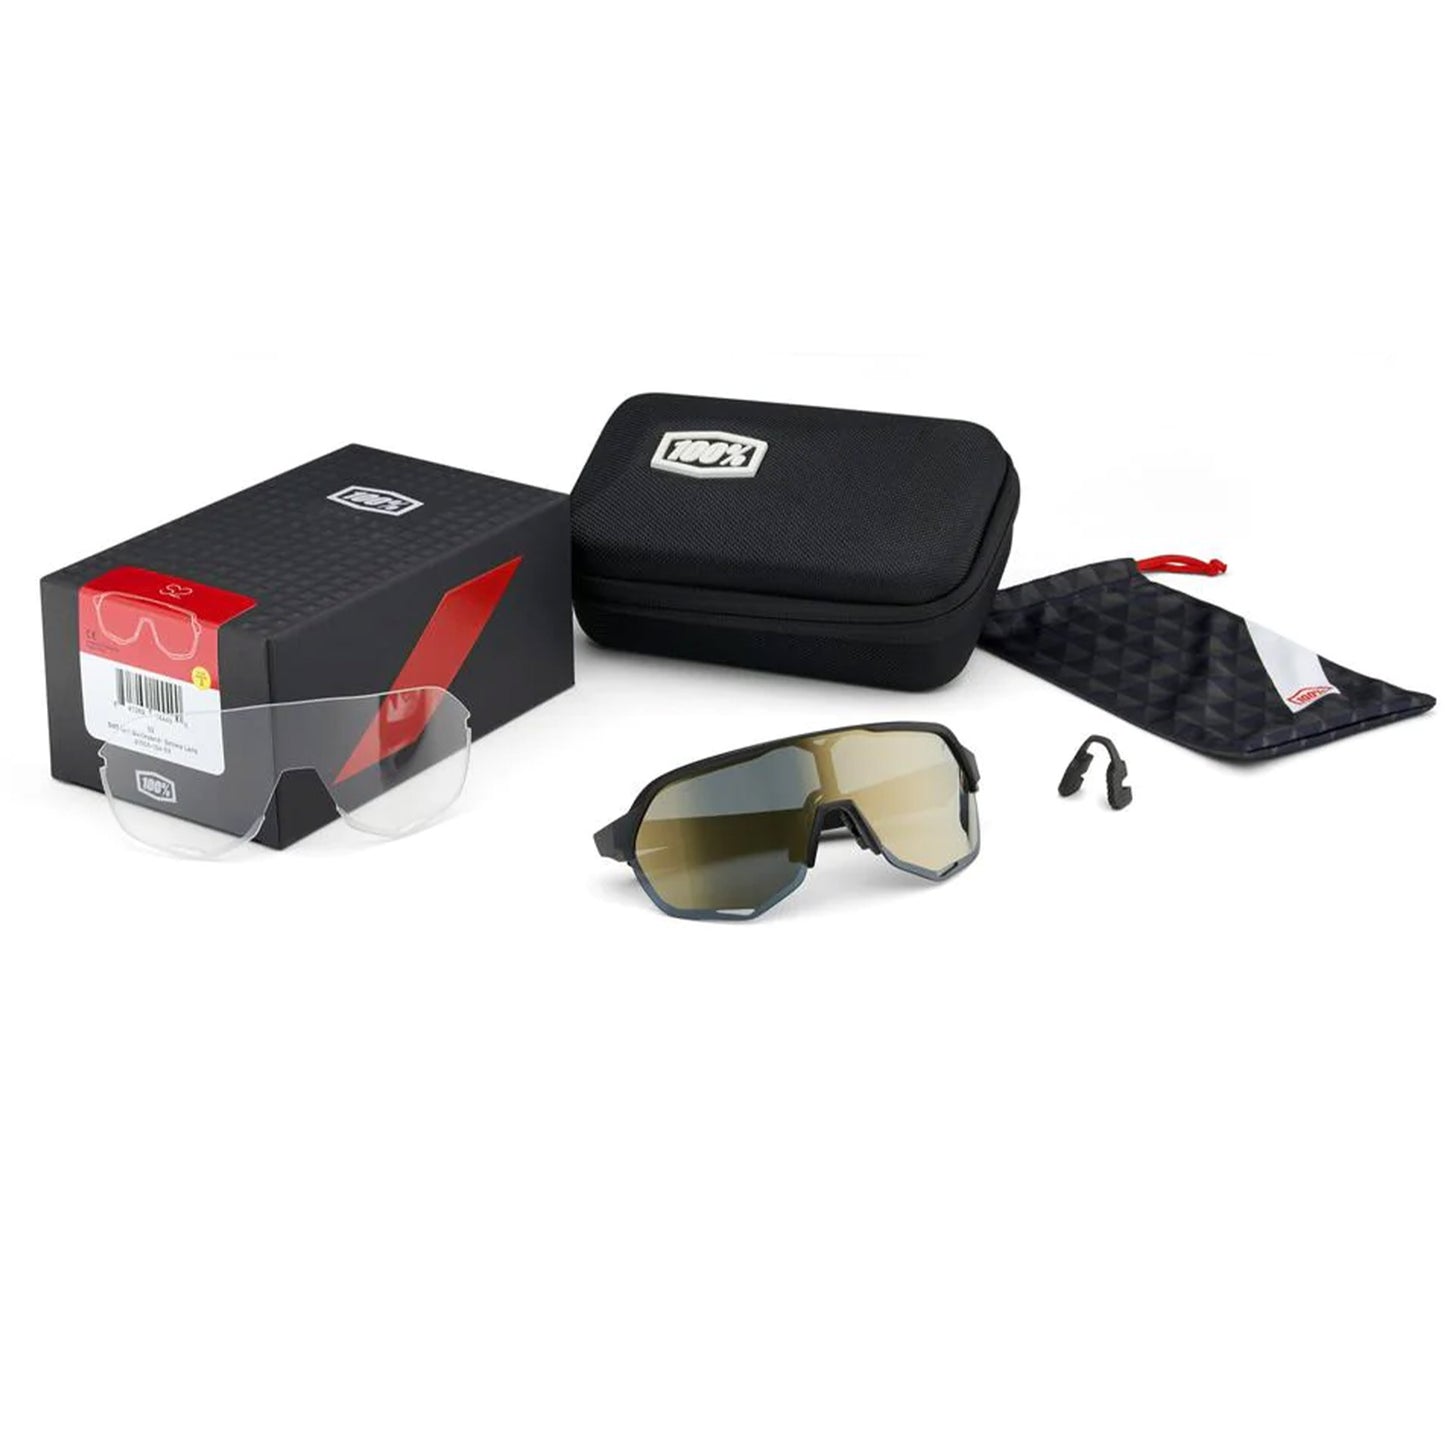 100% S2 Cycling Sunglasses - Matt Black with Soft Gold Mirror + Clear Lens